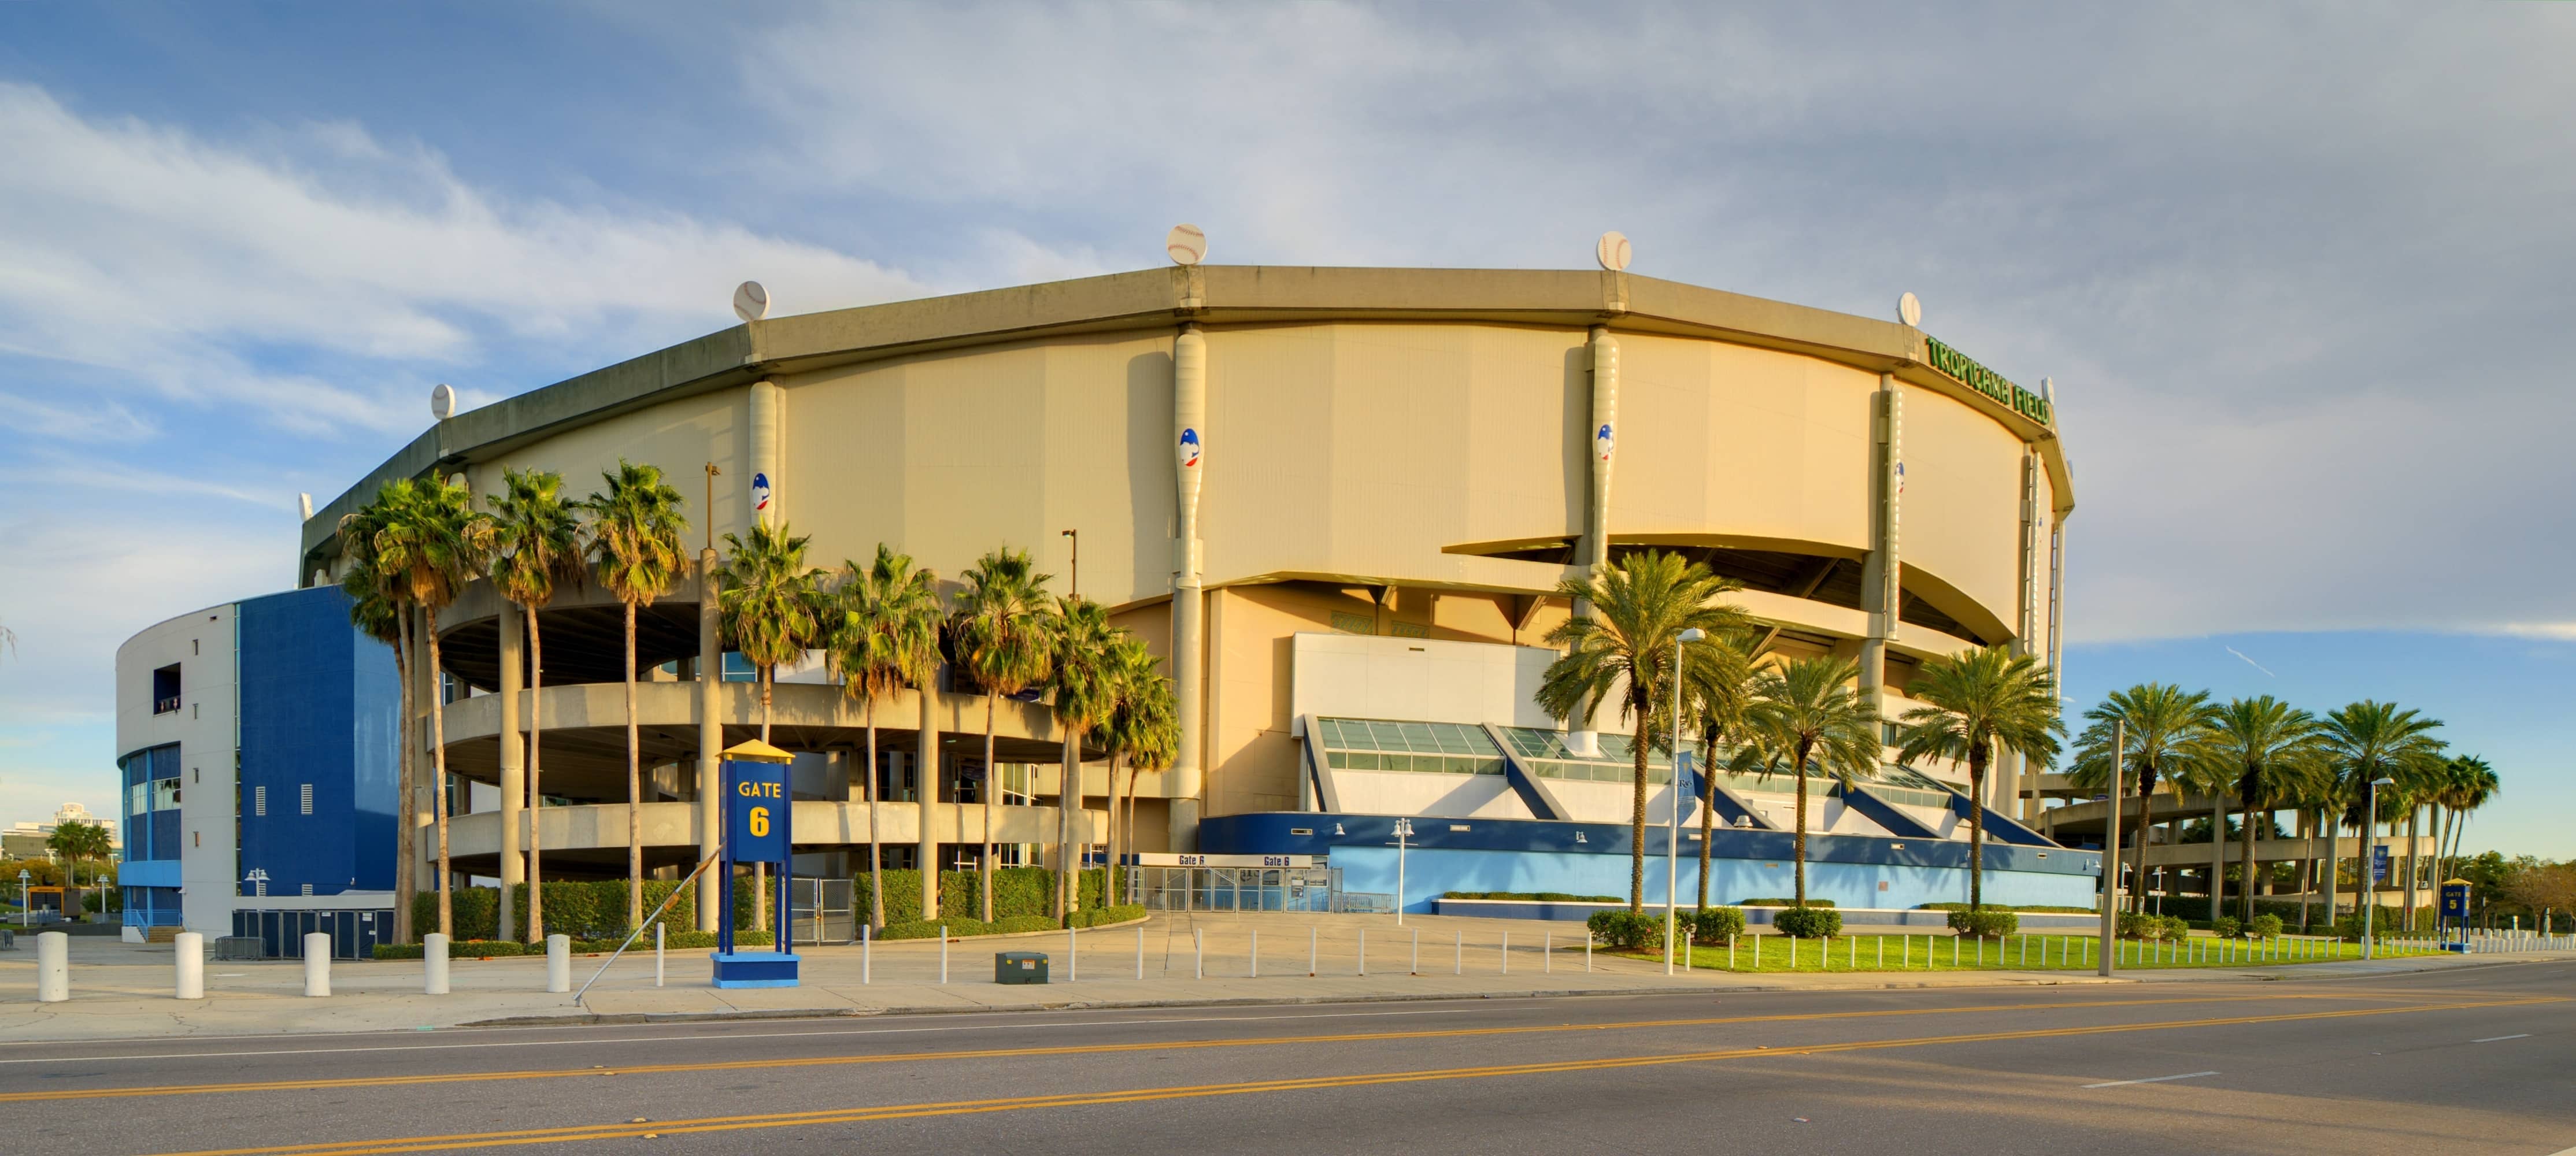 Are the Tampa Bay Rays getting a new stadium? New report suggests deal to  leave Tropicana Field is imminent